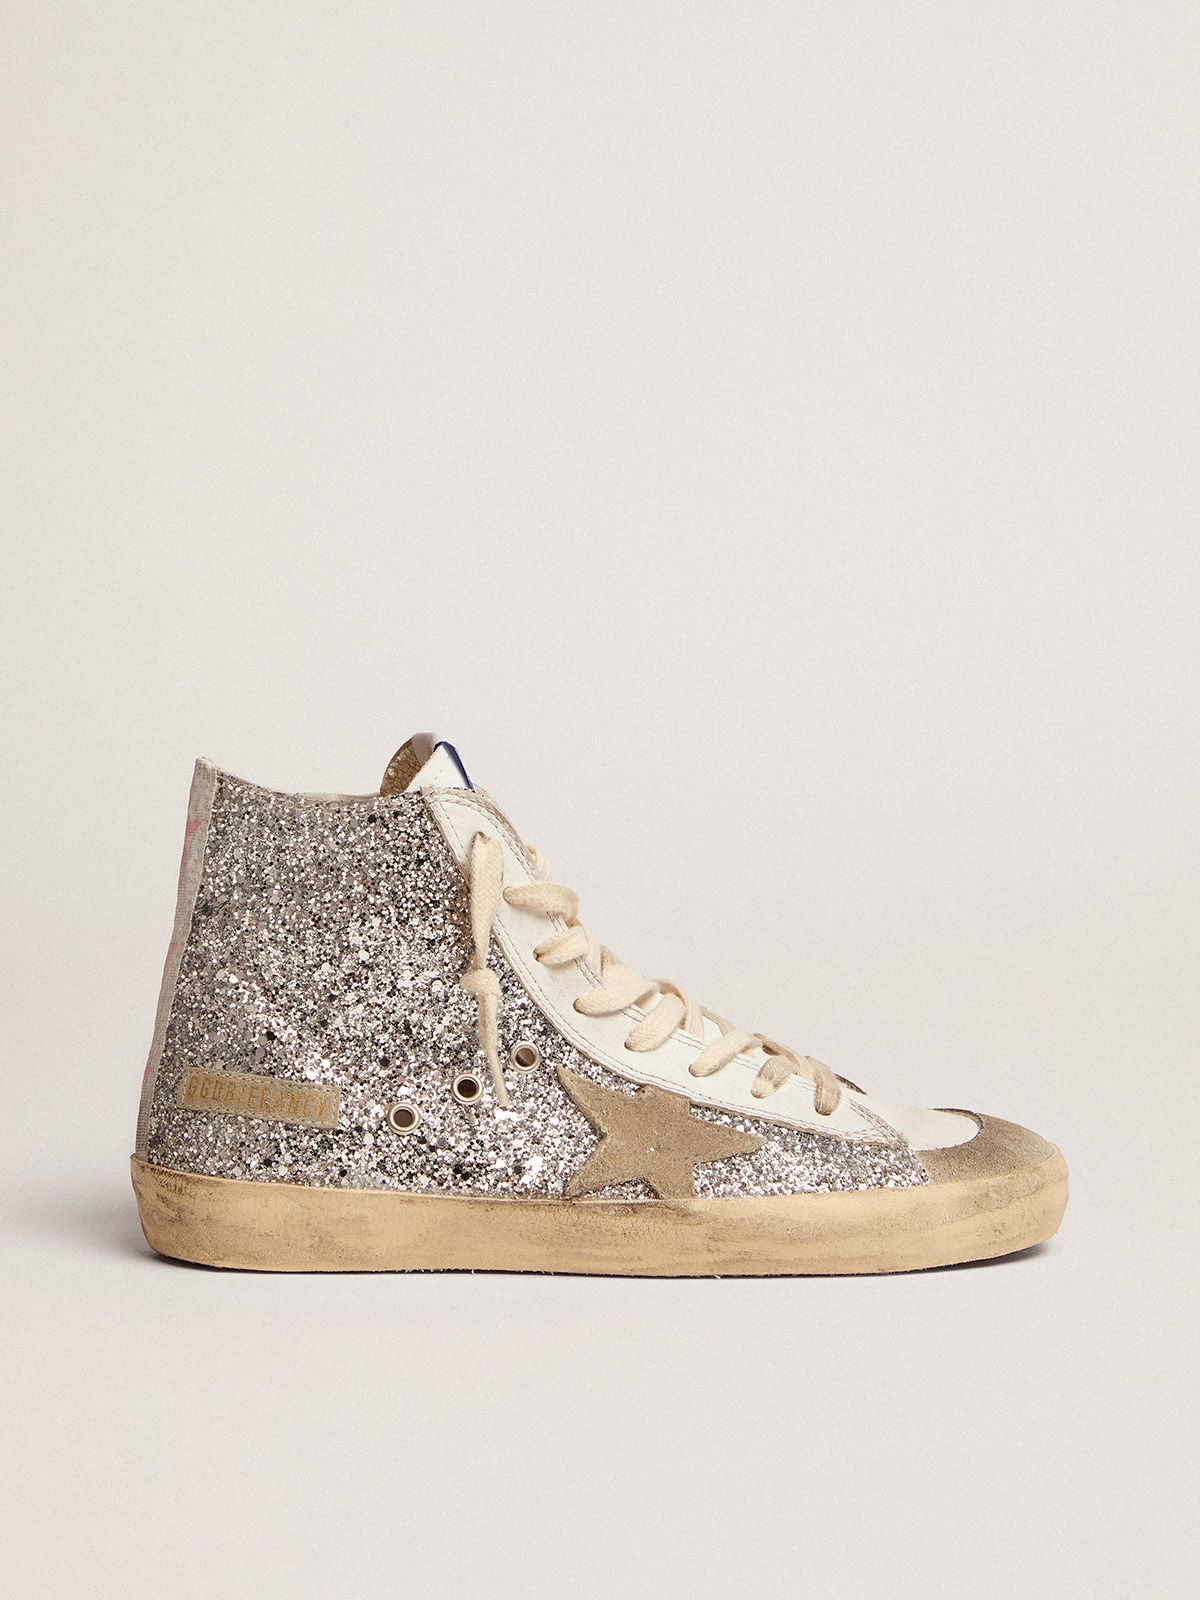 golden goose and suede sneakers upper with glitter Francy Penstar star silver ice-gray